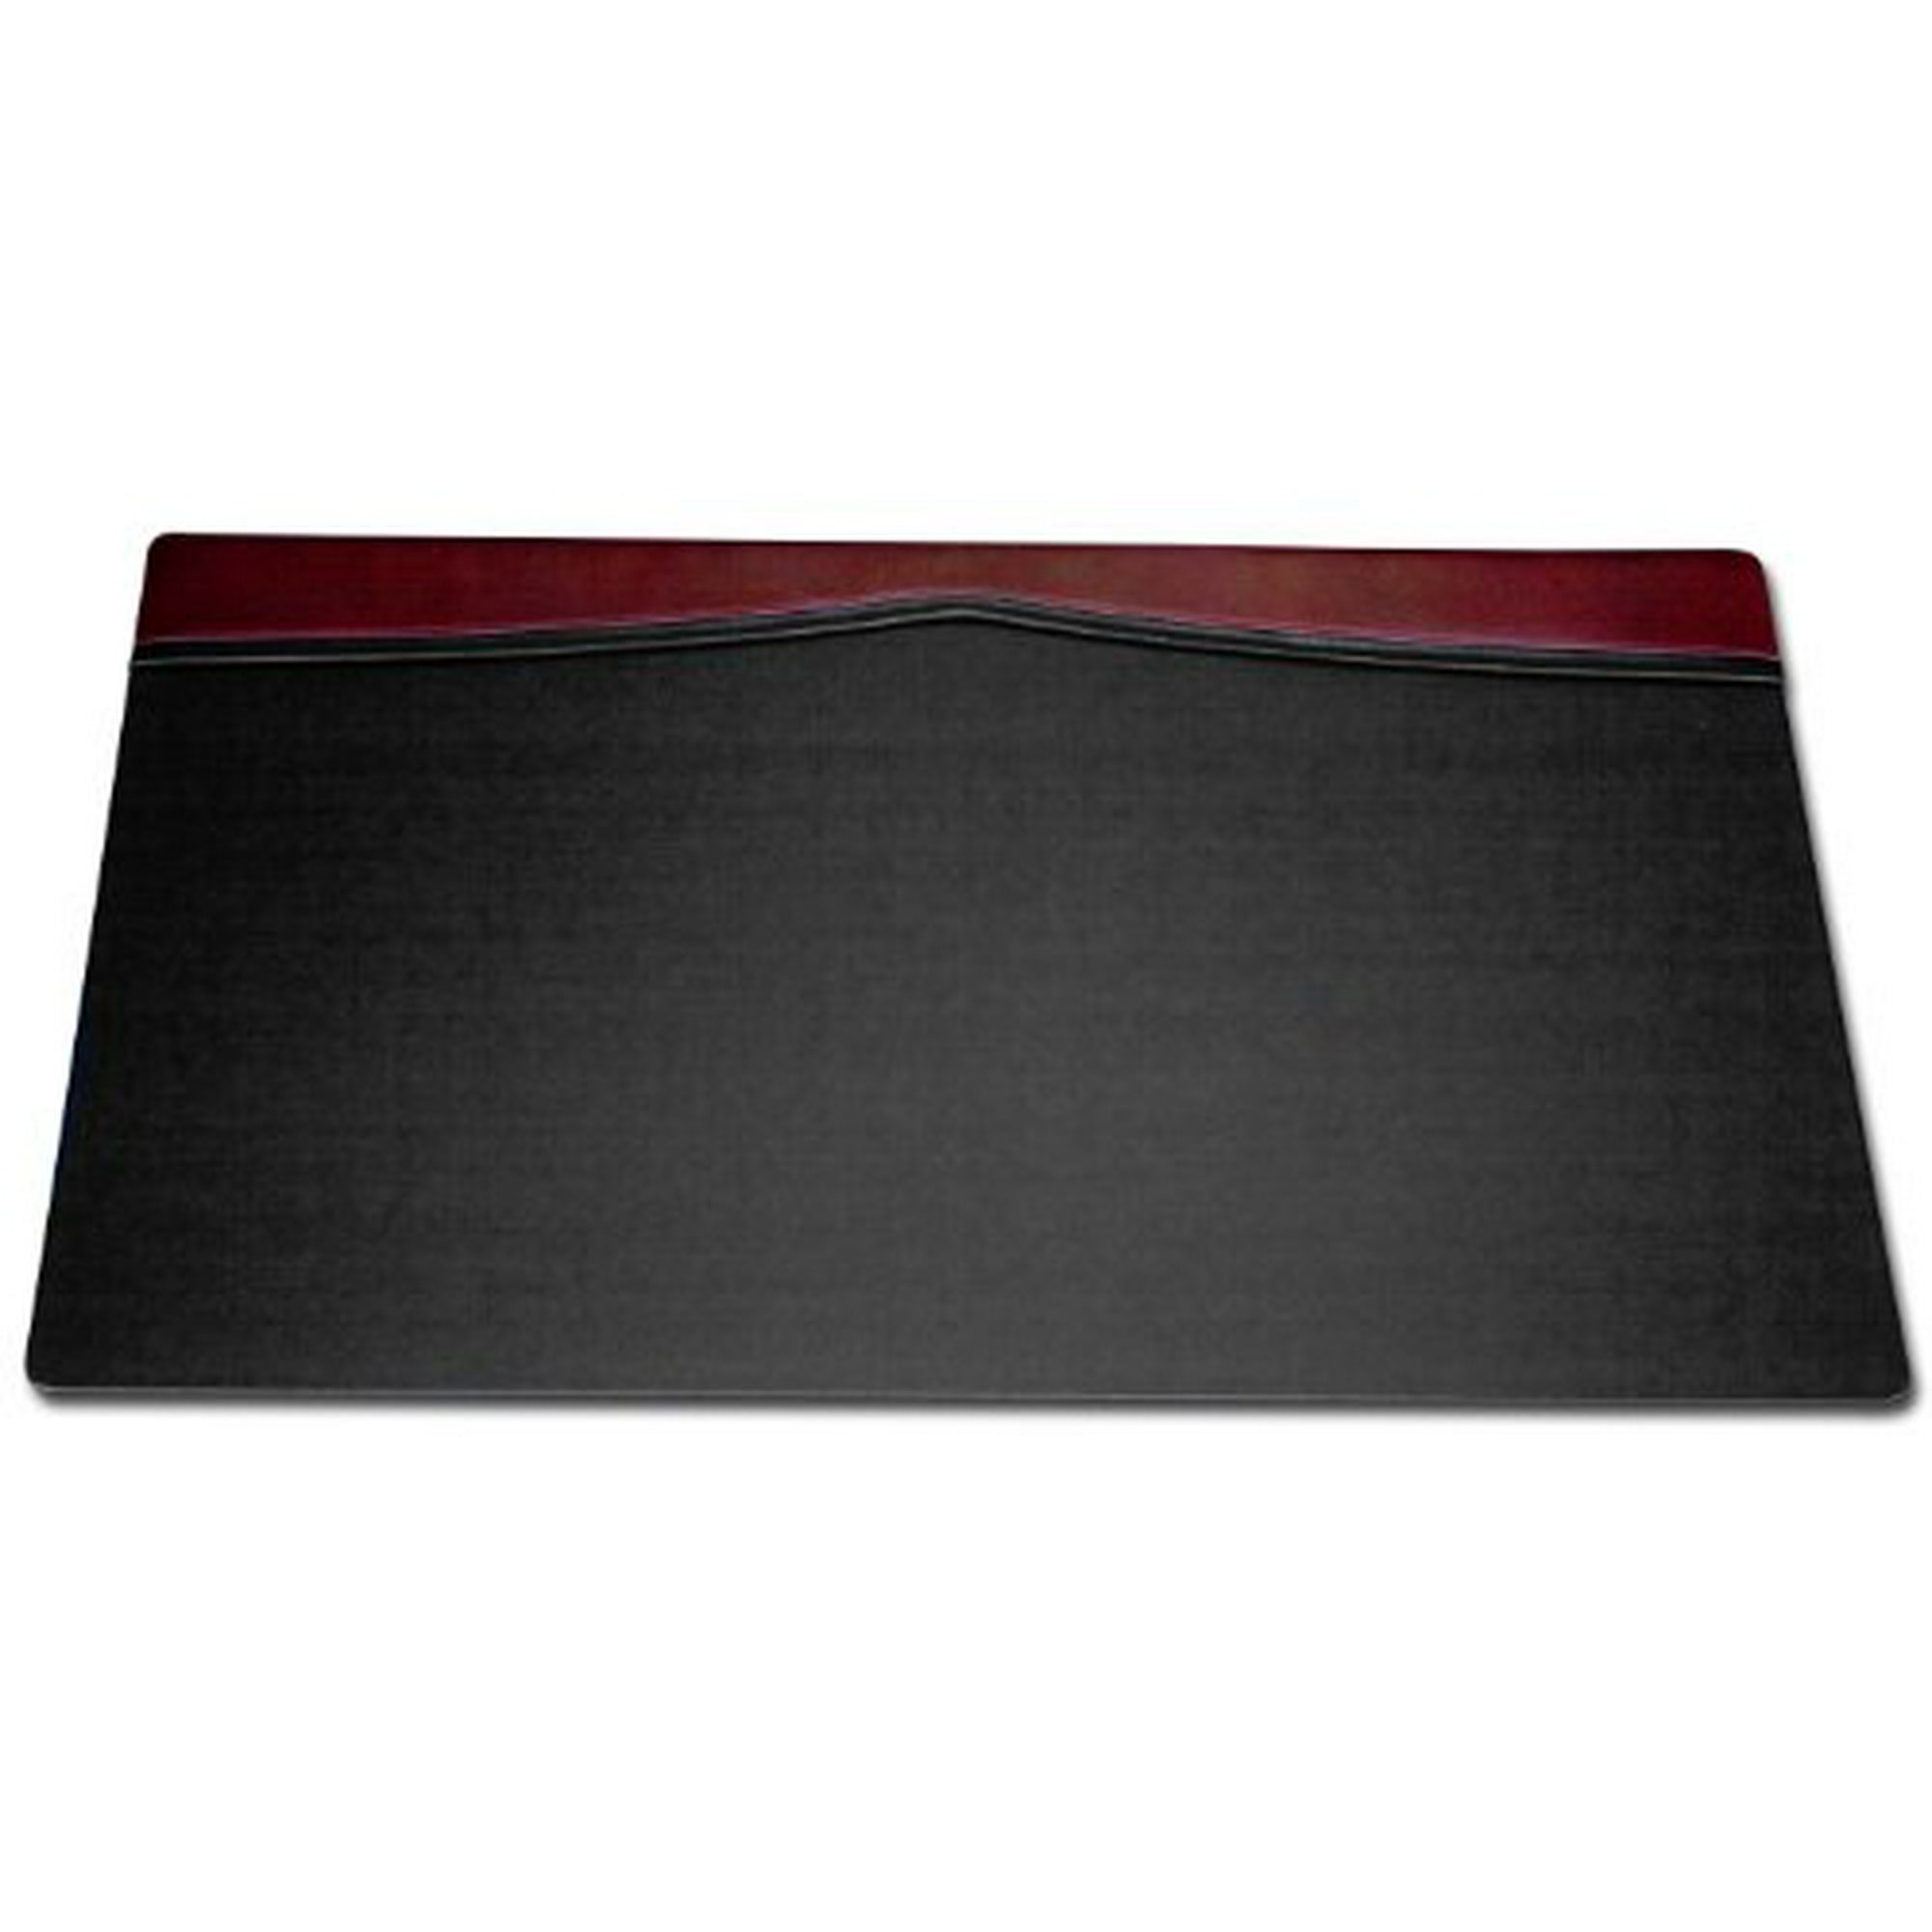 Dacasso Desk Pad With A Top Rail 34 By 20 Inch Burgundy